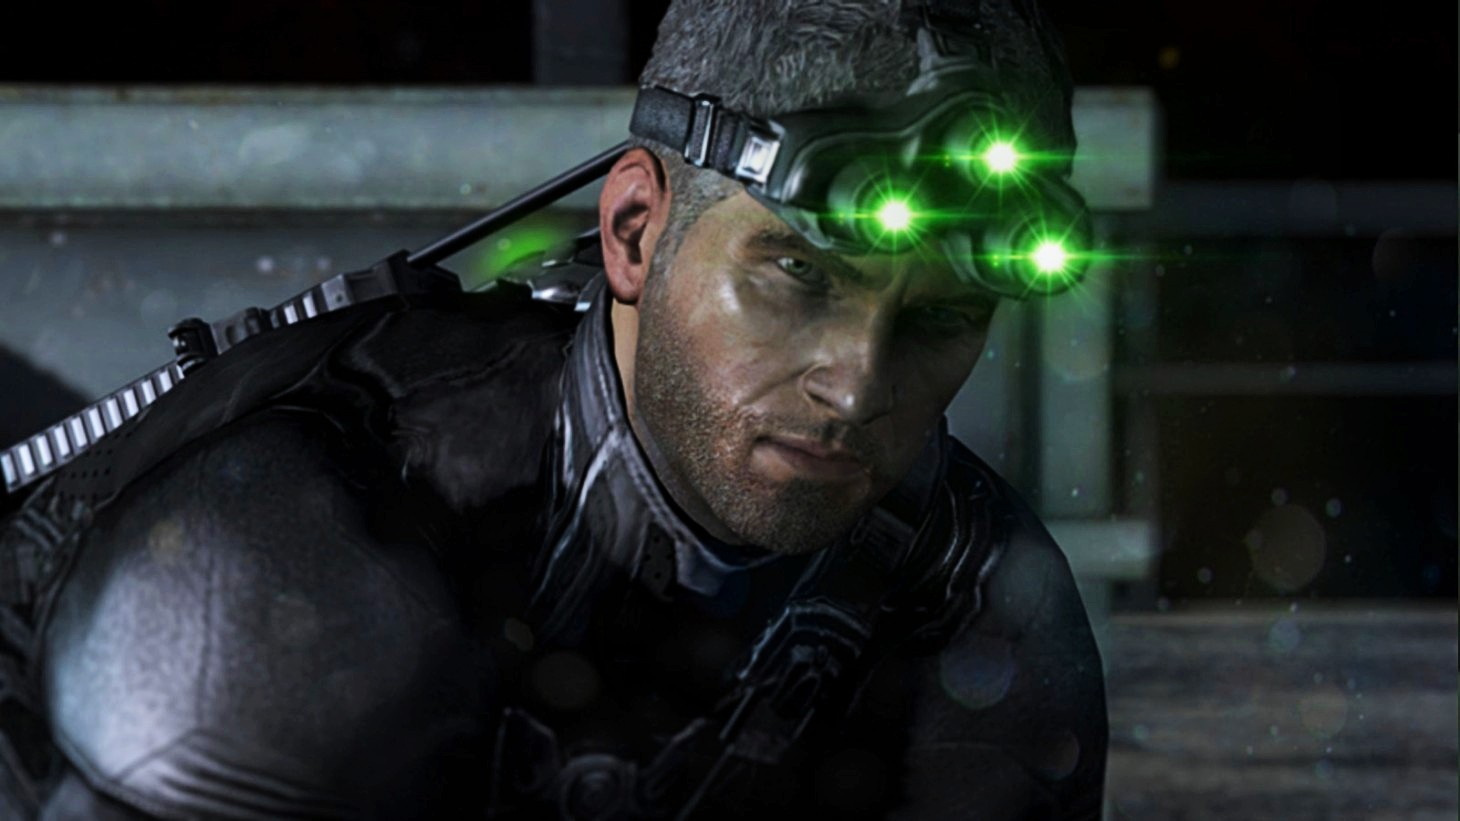 Splinter Cell Remake will be rewritten for modern audiences • VGLeaks 3.0 •  The best video game rumors and leaks